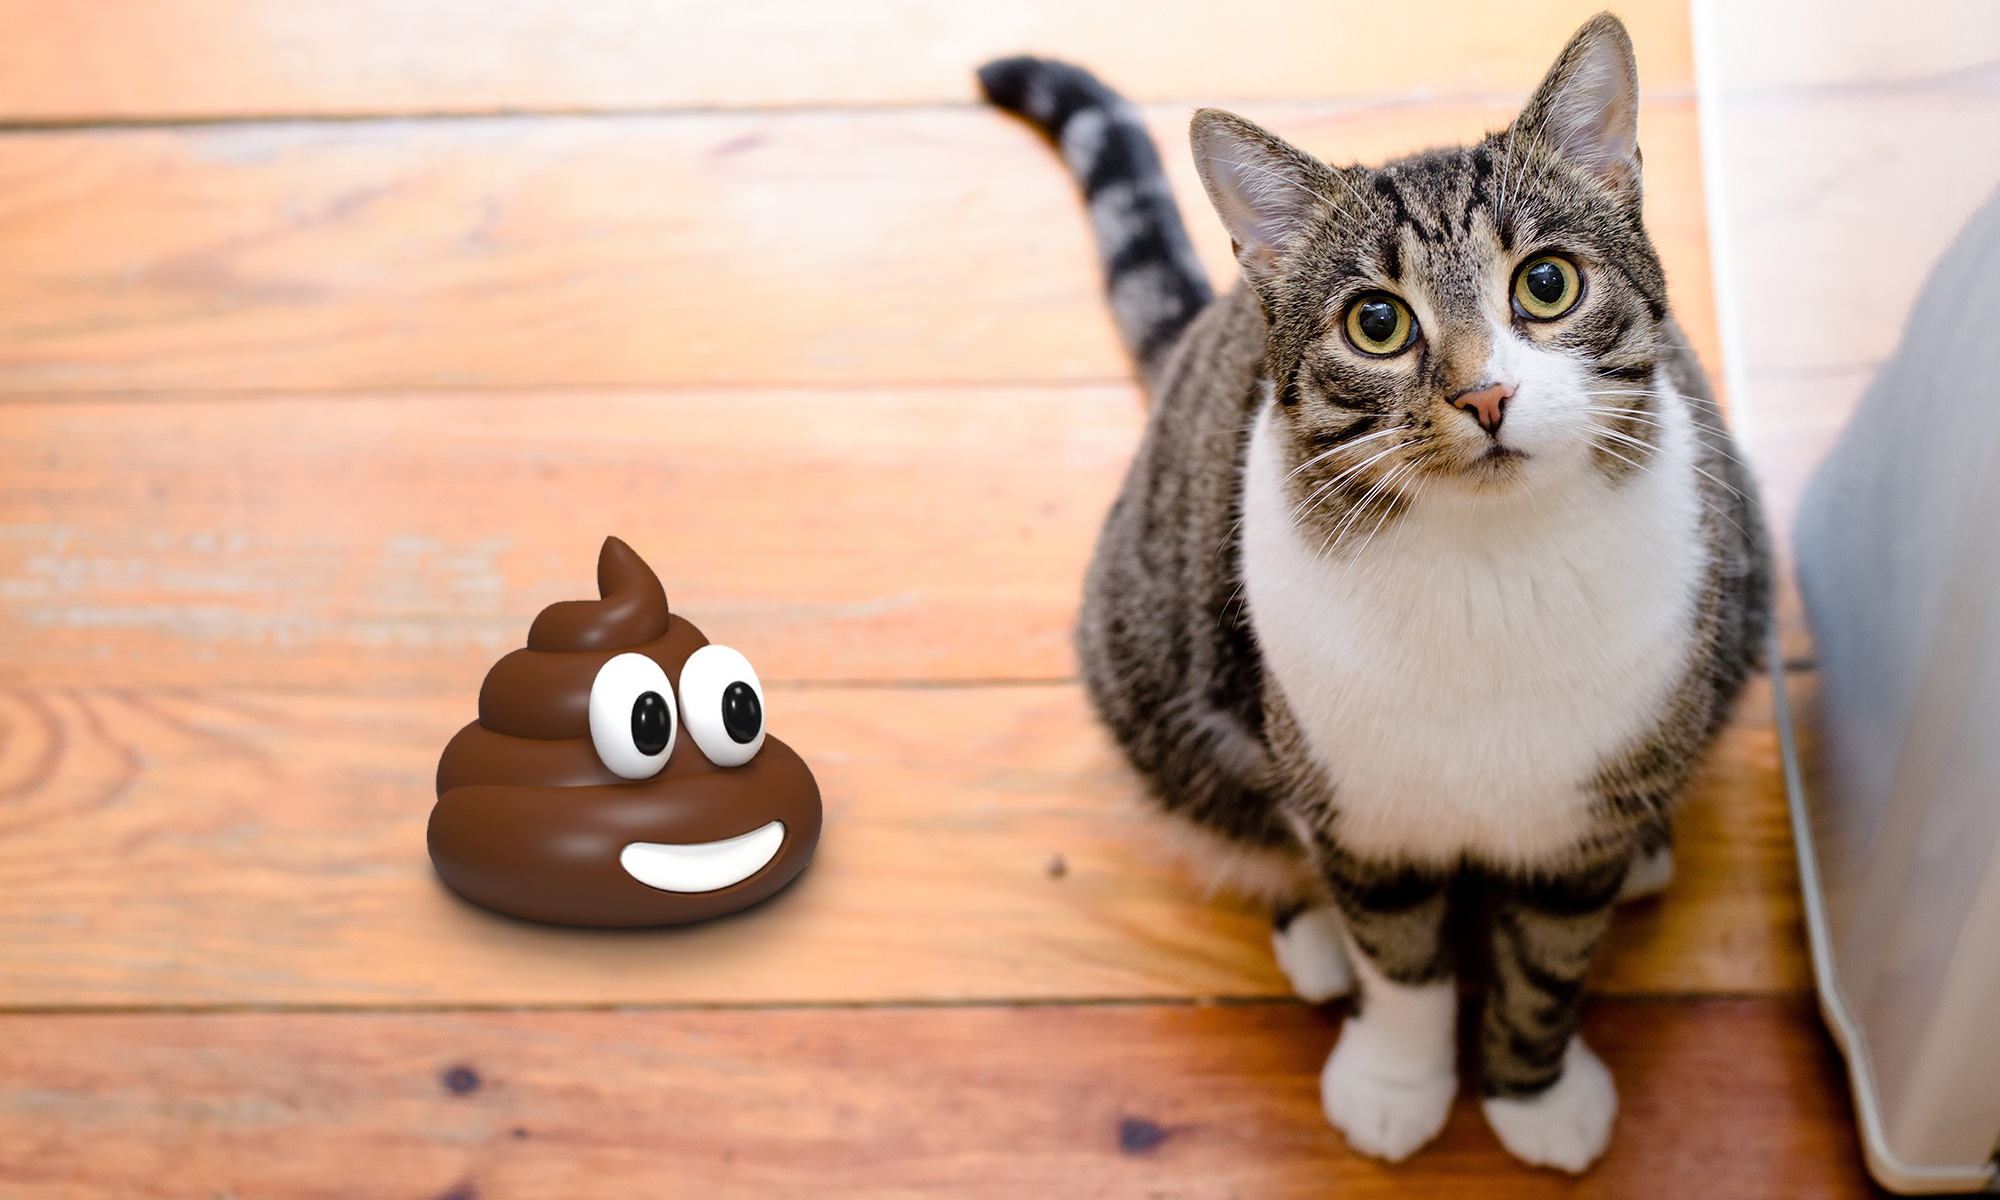 What Do You Do When You Find Kitty Poo Not in the Litter Box